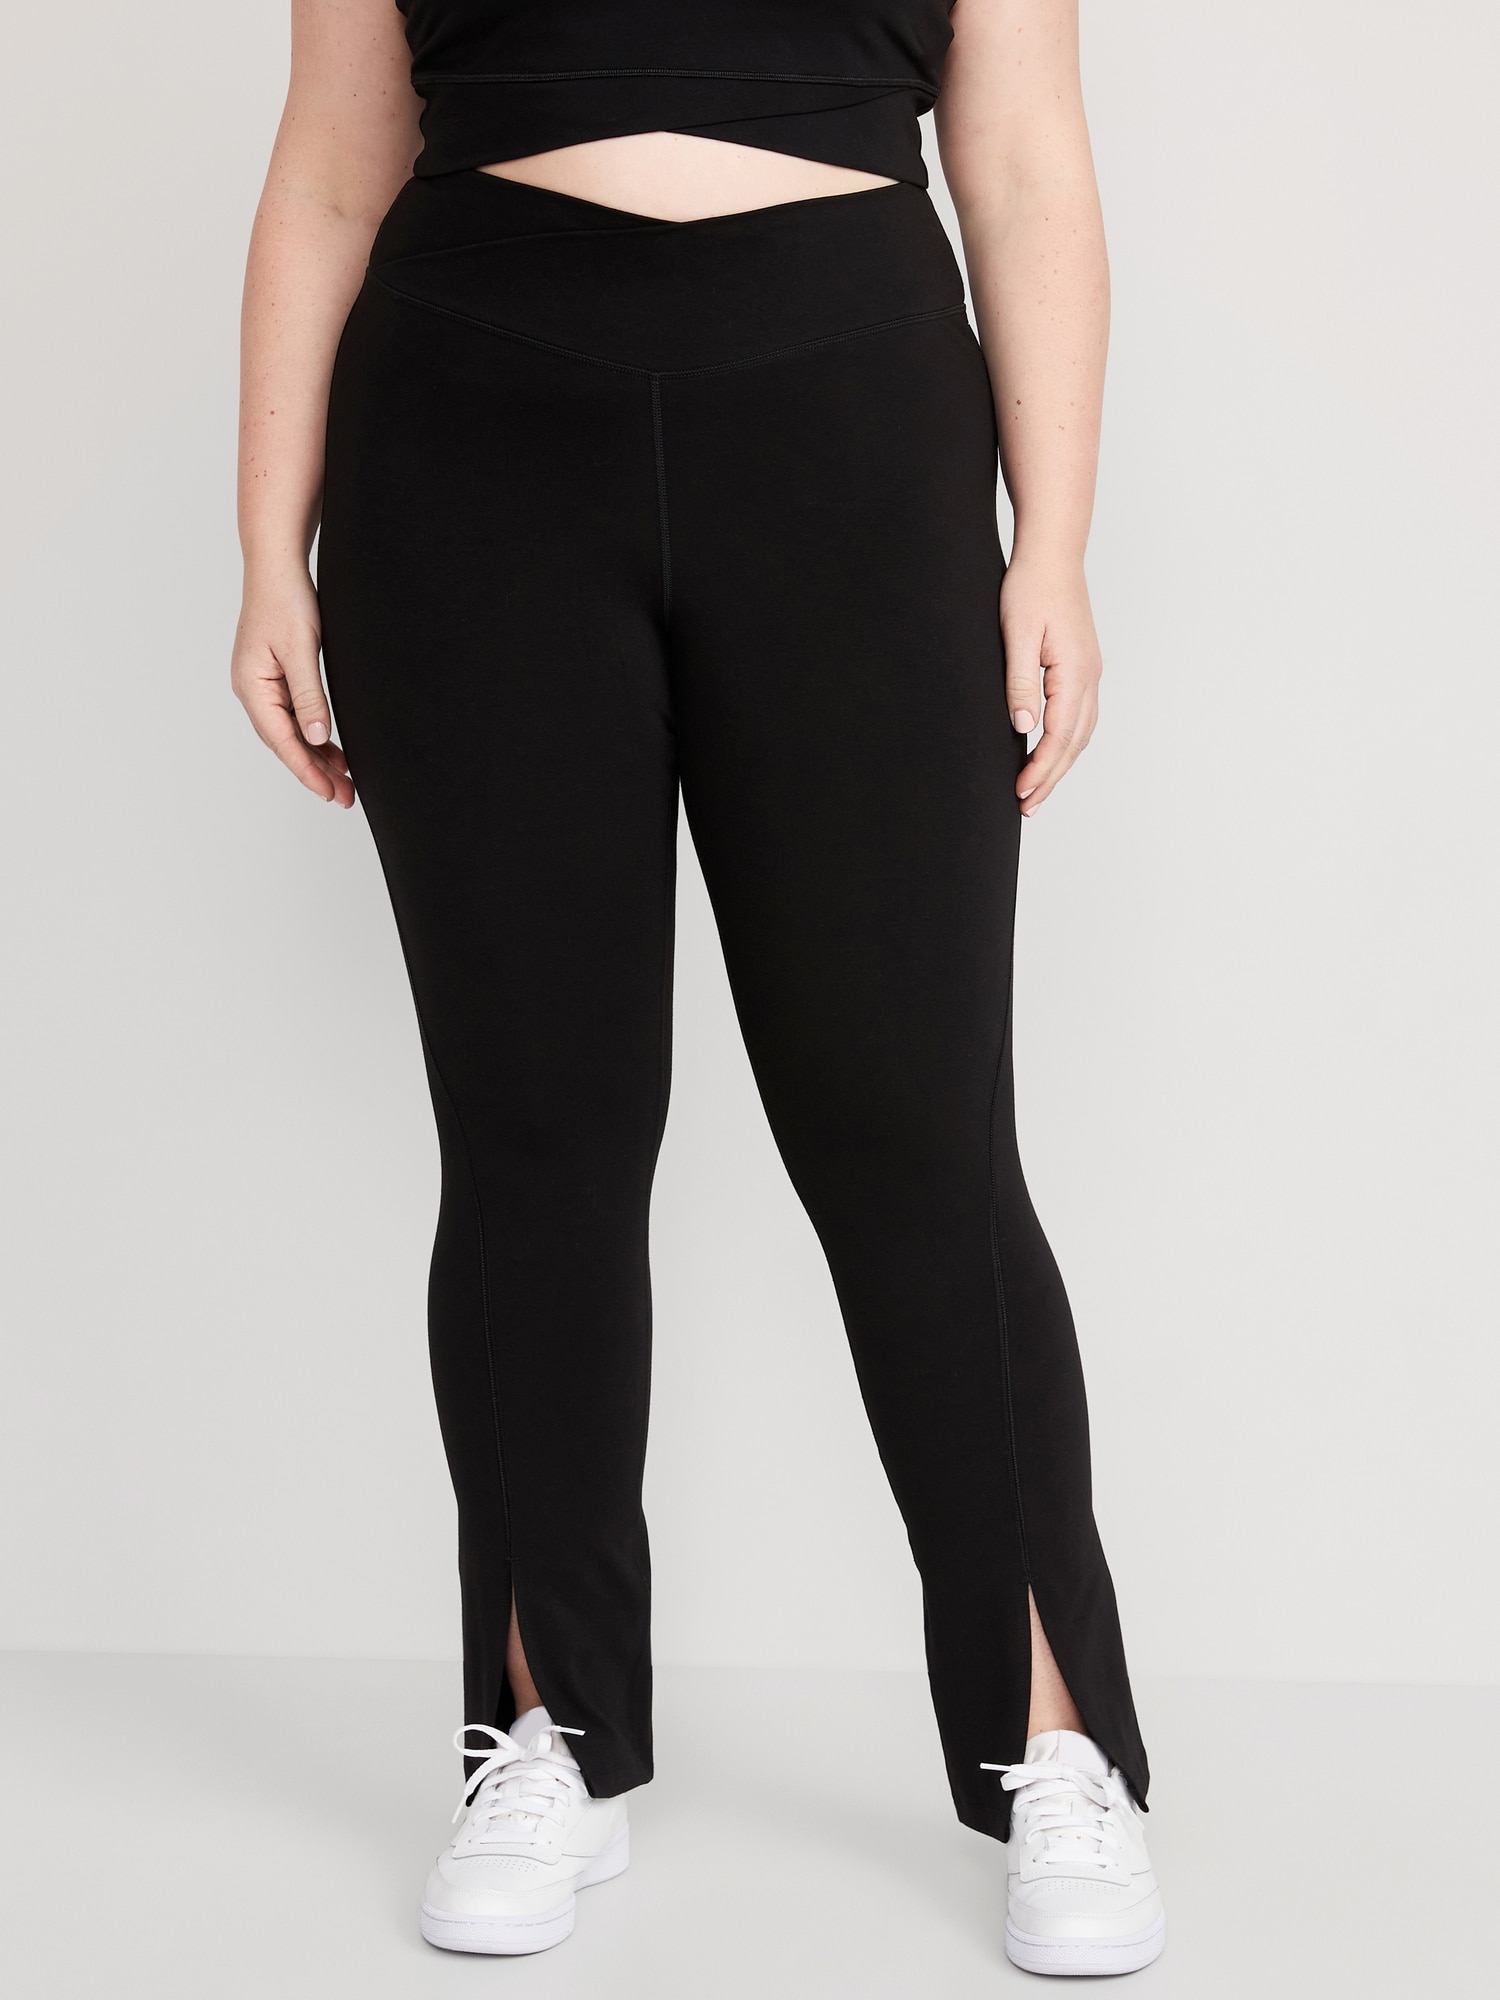 Old Navy PowerChill Black Crossover Yoga Pants Size L - $21 (30% Off  Retail) New With Tags - From HannahBeth